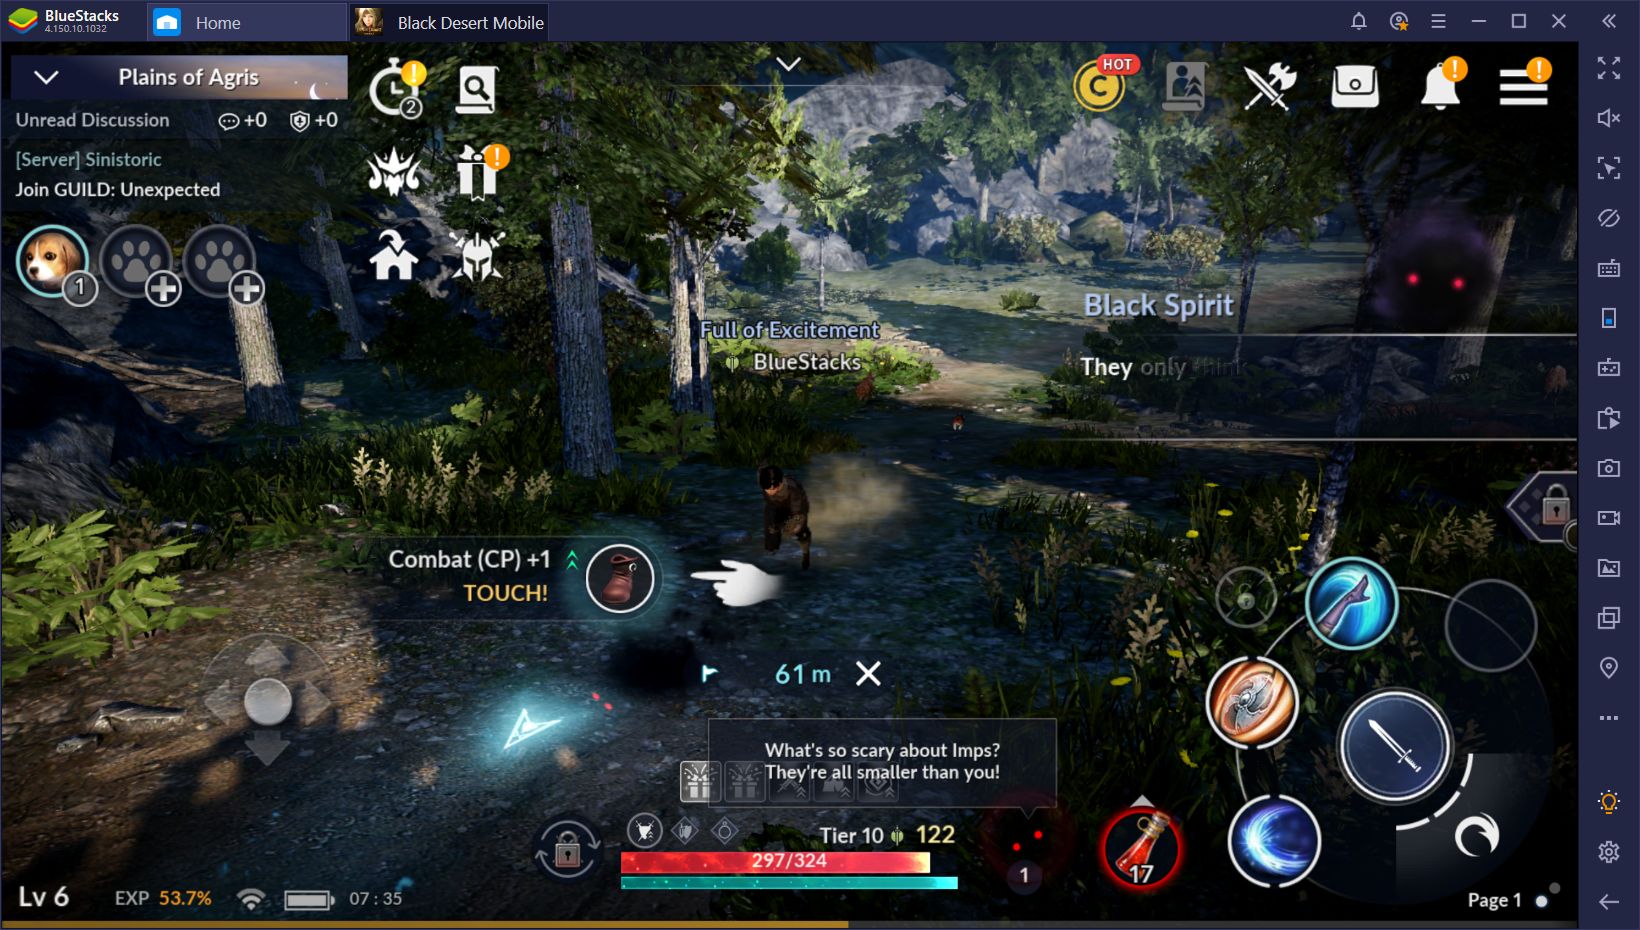 The Updated 2019 Review of Black Desert Mobile